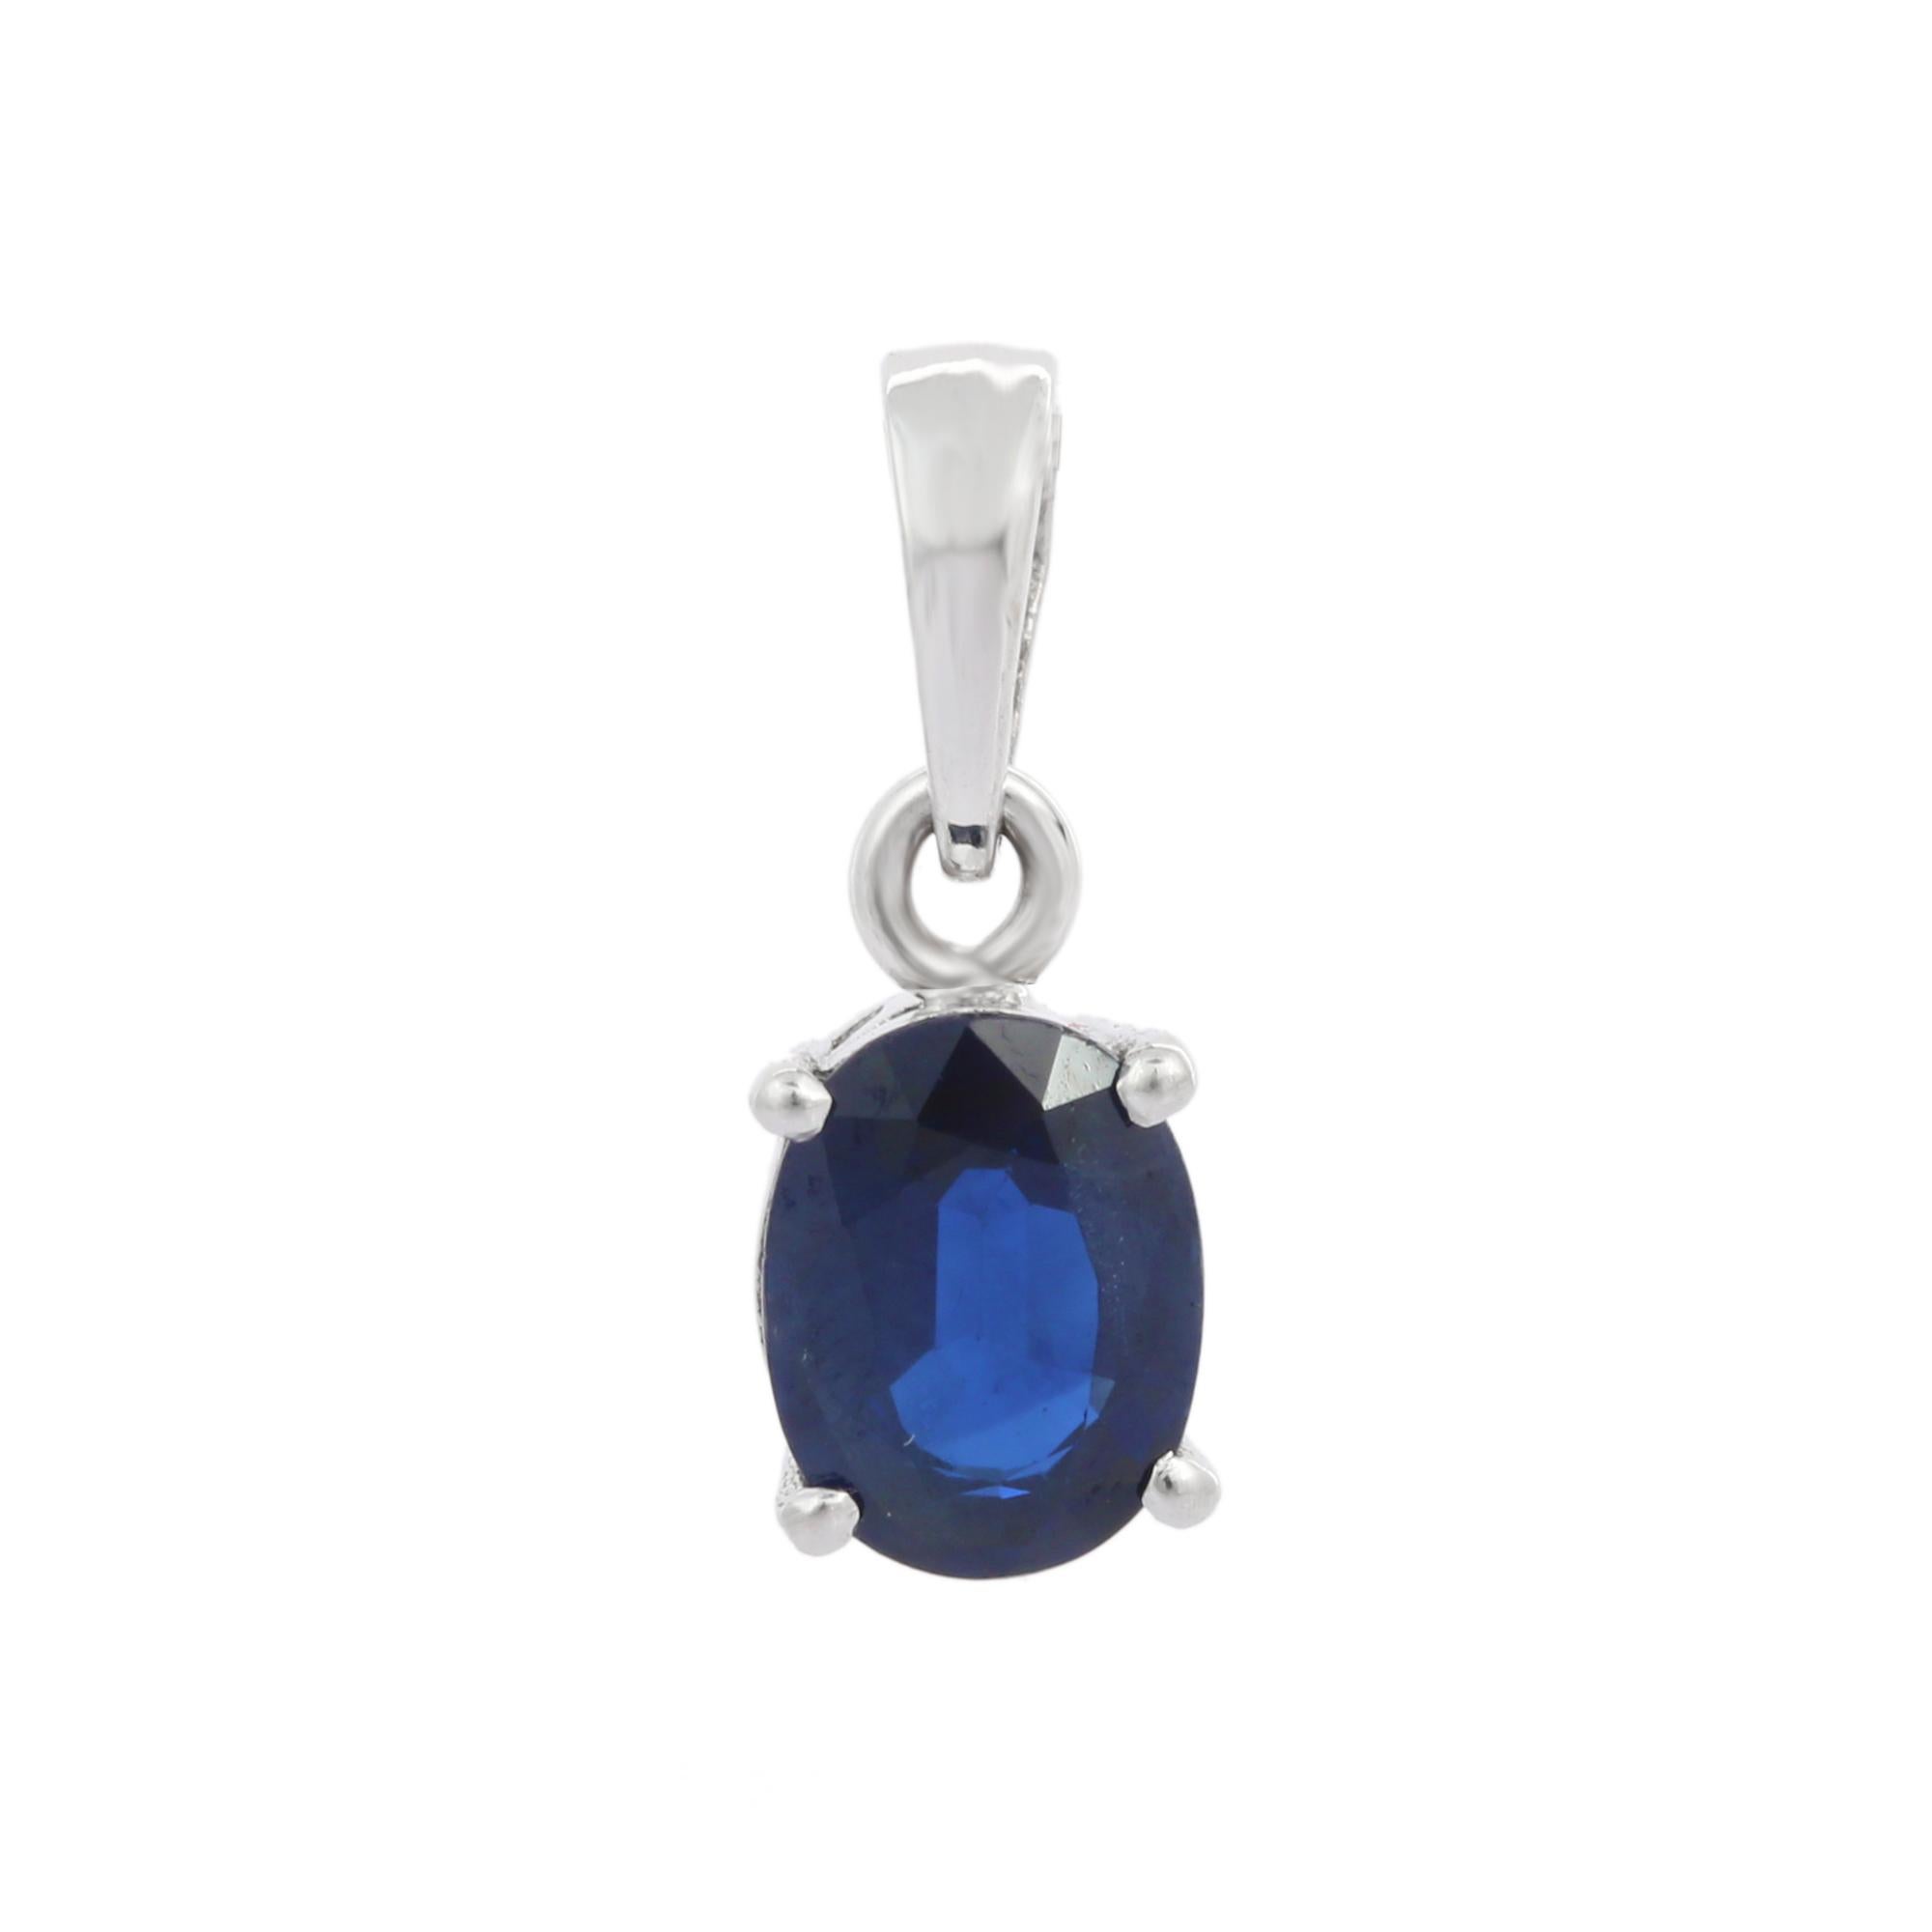 Natural Blue Sapphire pendant in 18K Gold. It has a oval cut sapphire that completes your look with a decent touch. Pendants are used to wear or gifted to represent love and promises. It's an attractive jewelry piece that goes with every basic